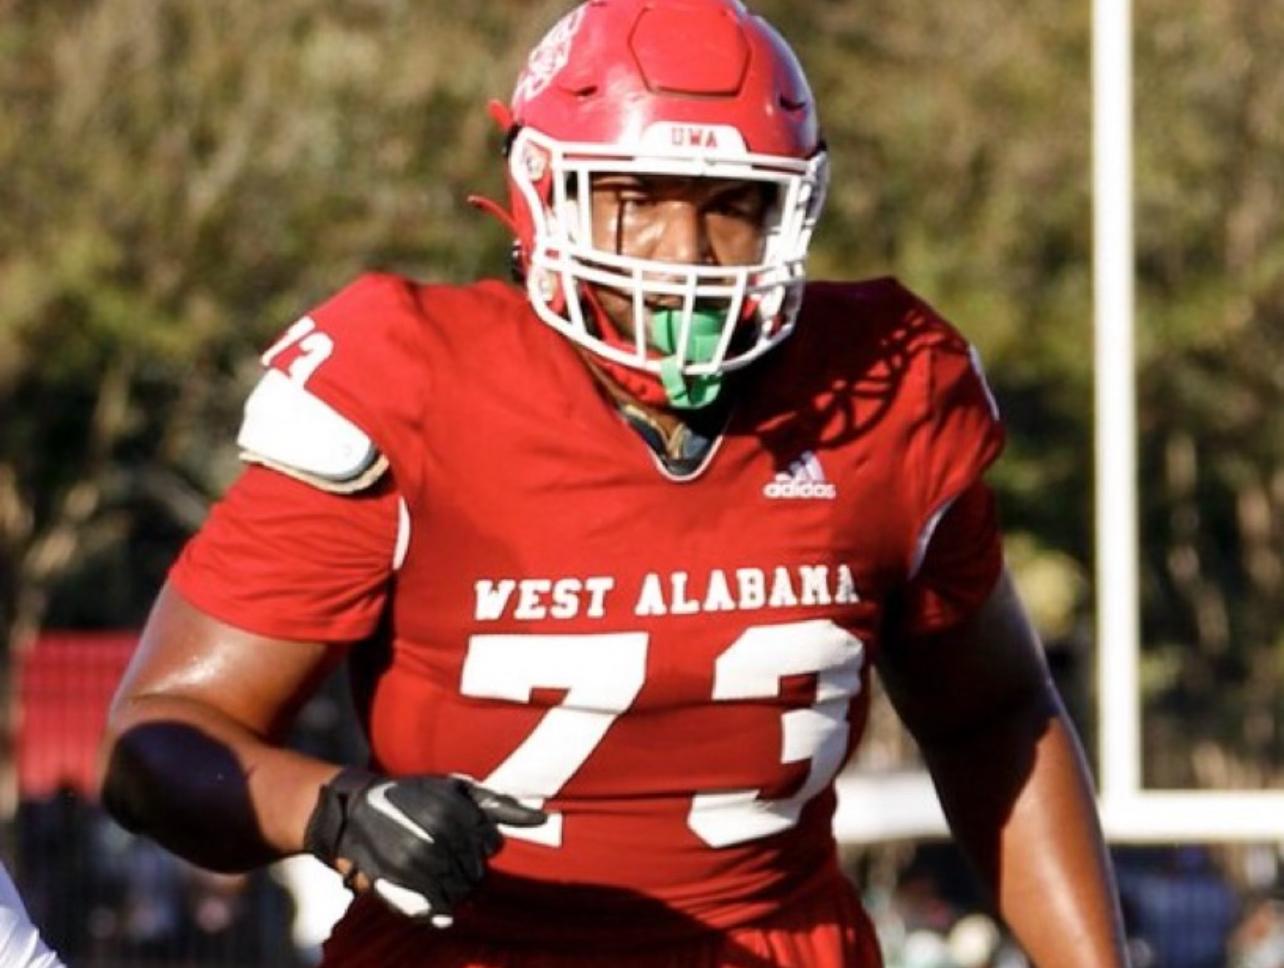 Tahj Brighthaupt is an intriguing small-school OL prospect with alluring physical traits, strong hand use at the POA